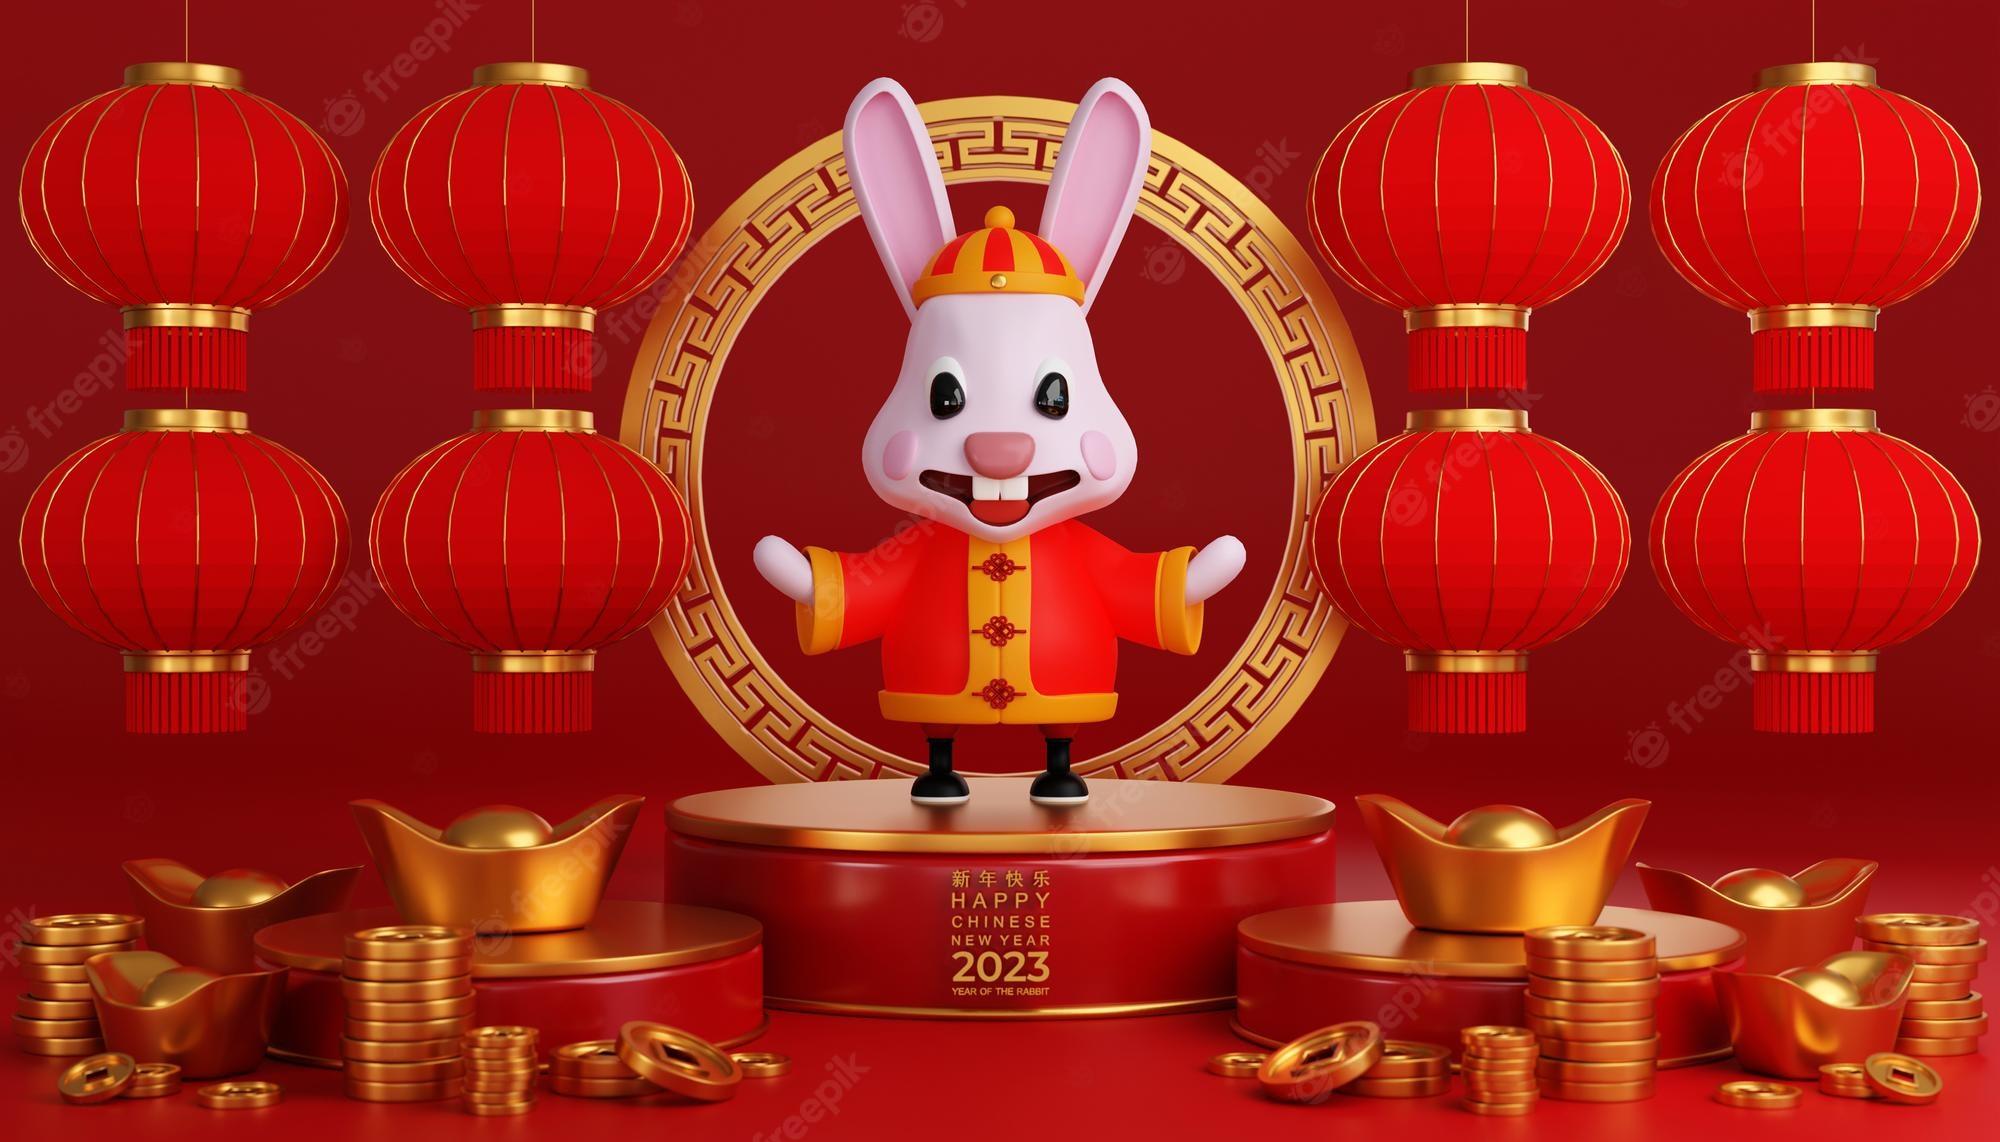 Premium Photo 3d Illustration Of Cute Rabbits For Happy Chinese